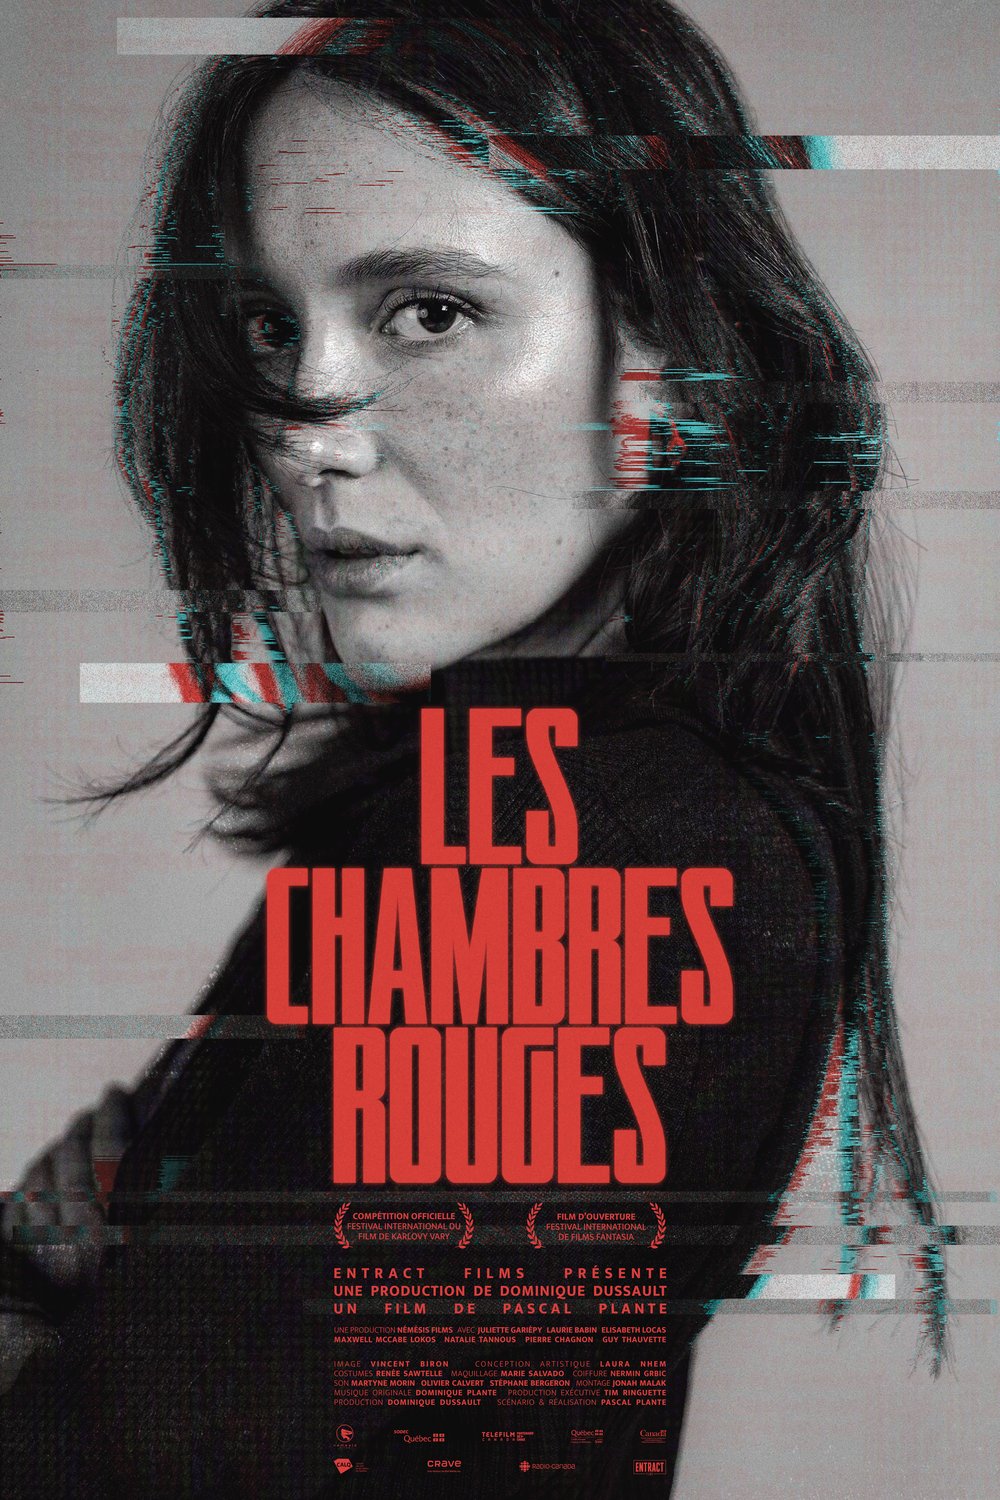 Poster of the movie Les chambres rouges